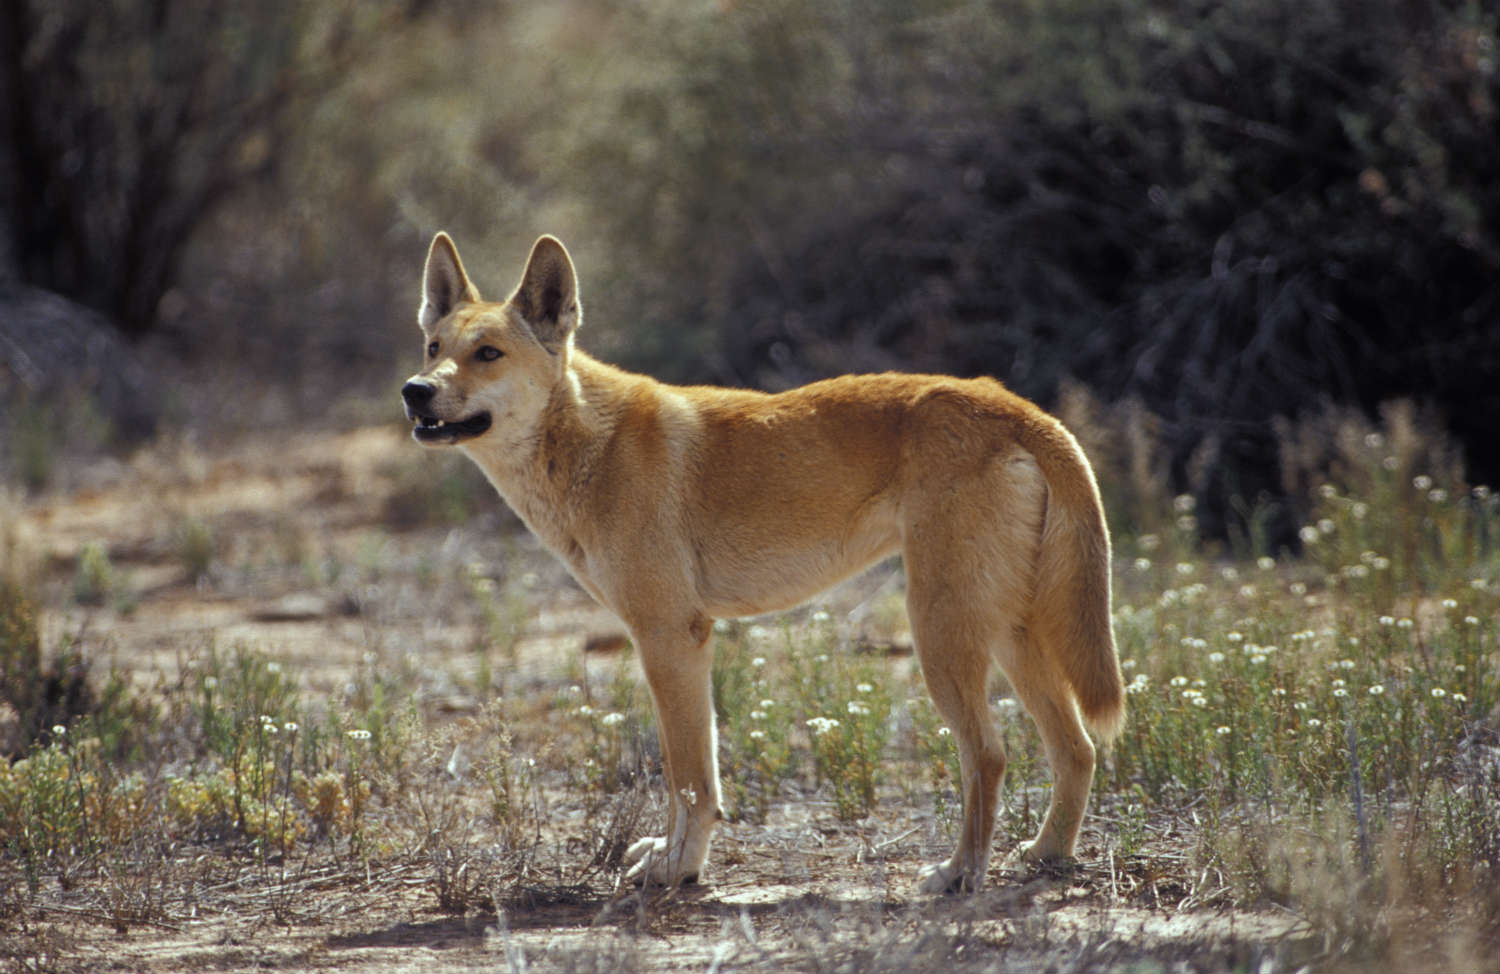 Dingoes are blamed for hunting the Tasmanian tiger to extinction. But humans bear the blame (Jason Edwards via Getty Images)